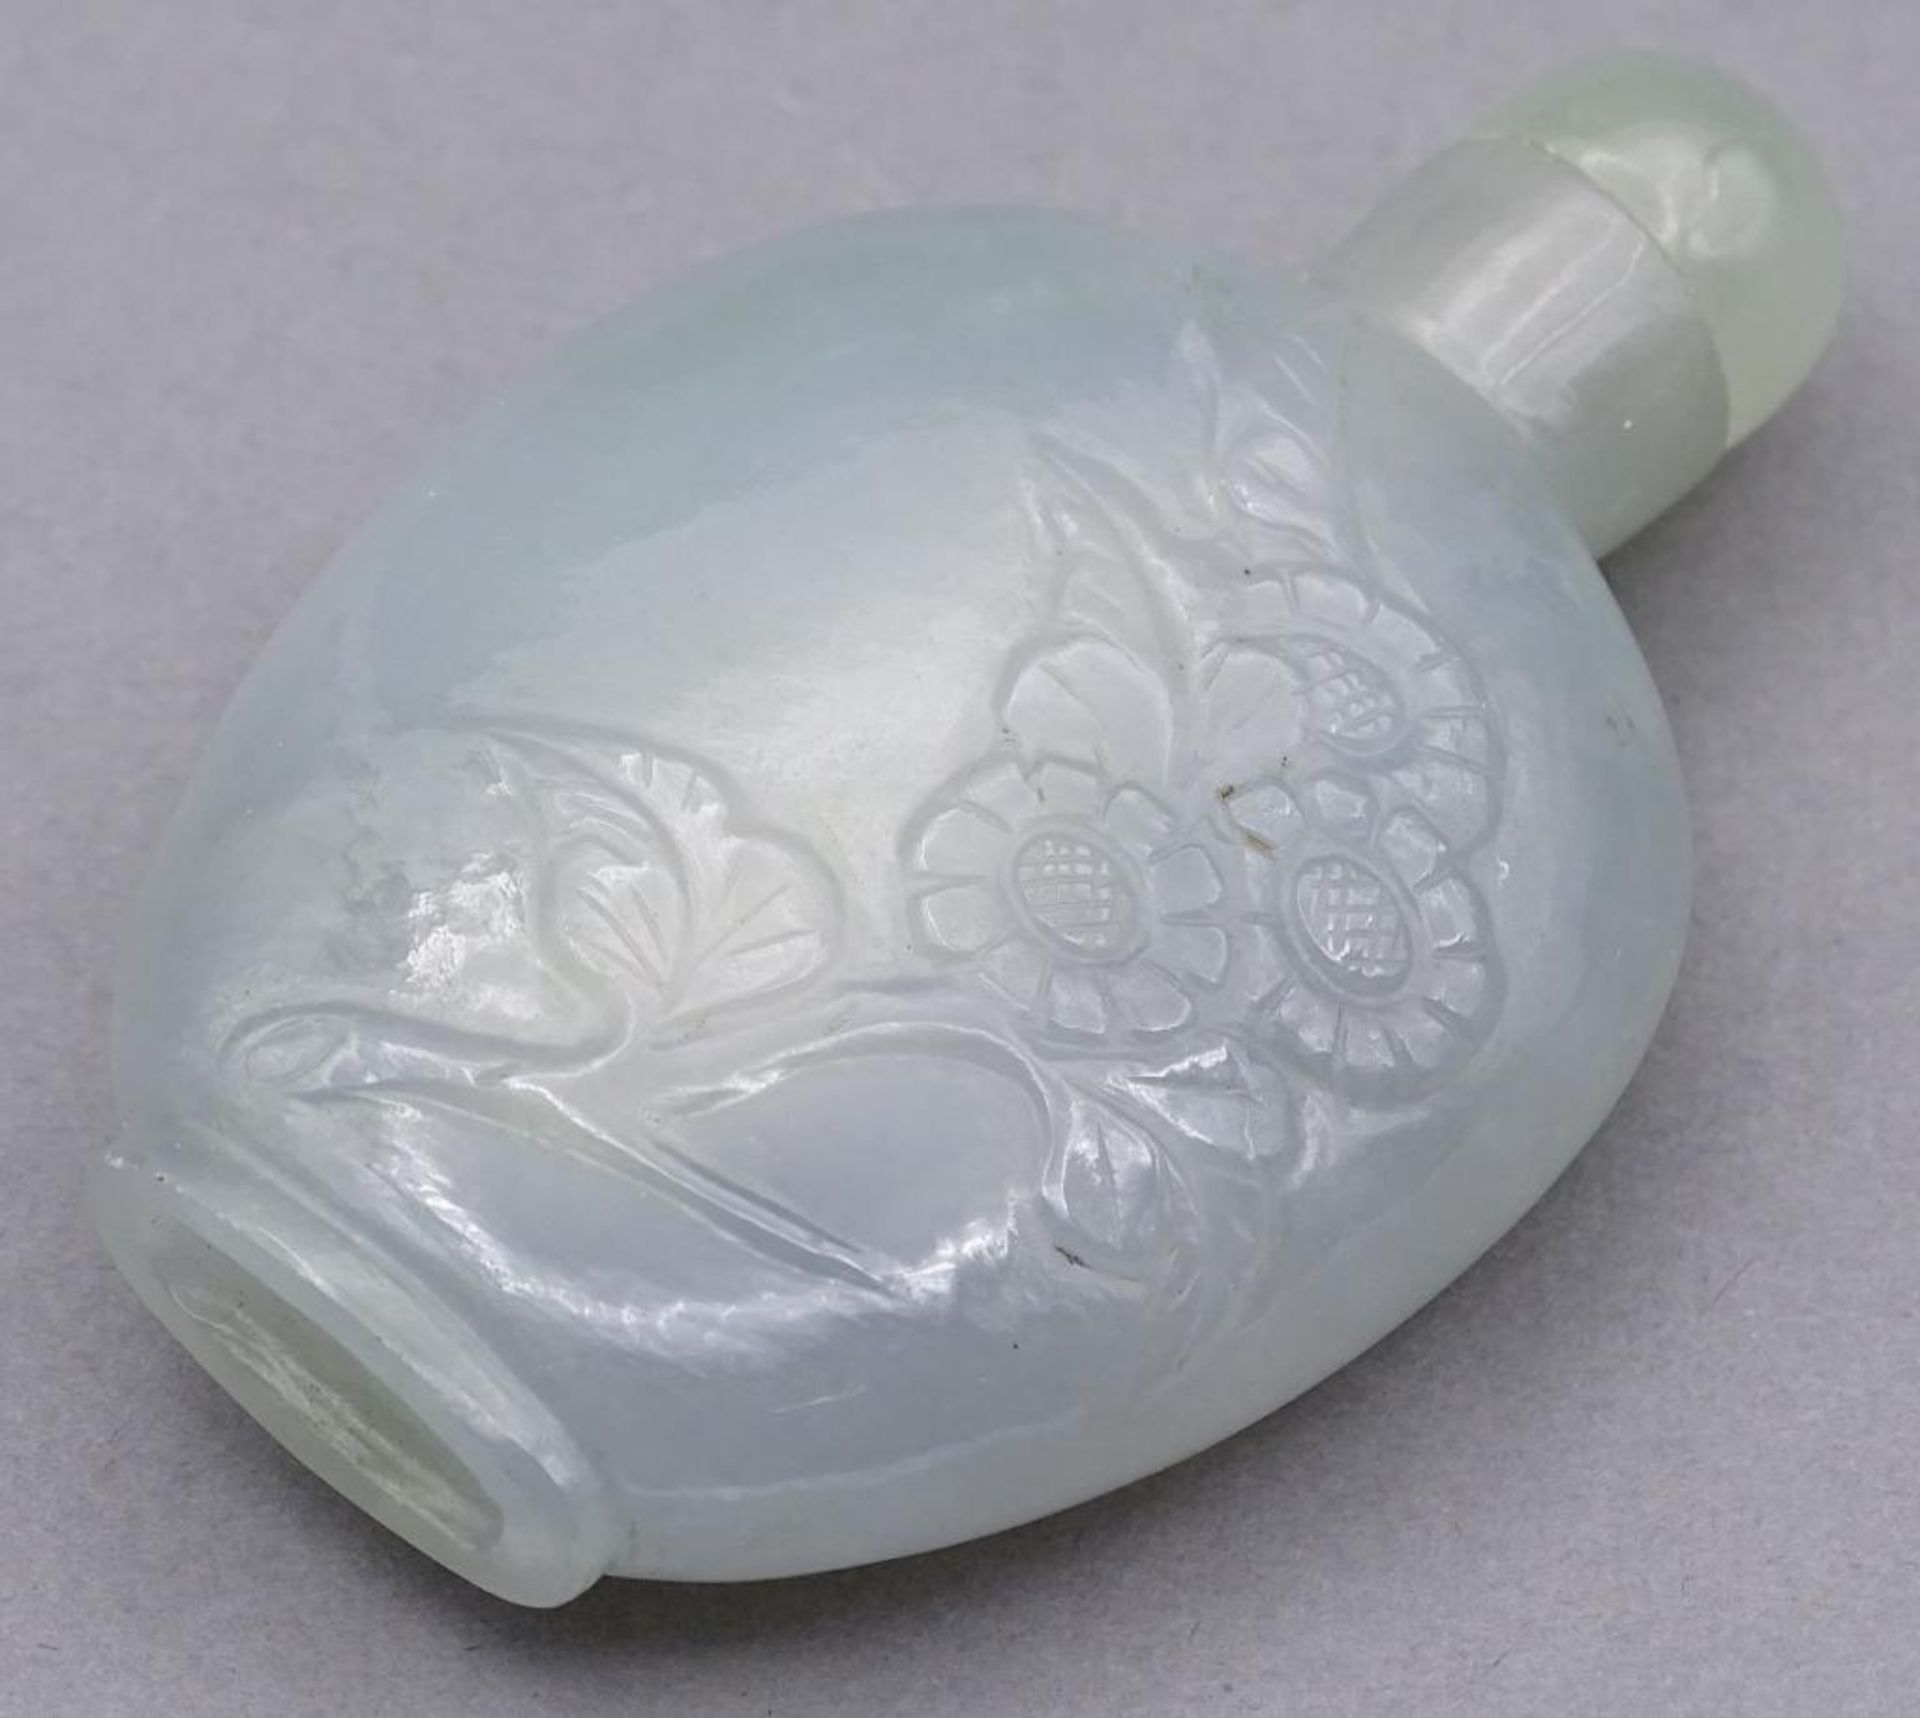 kl. Snuff Bottle,wohl Jade, China, h-6 cm, B-3,5 cm- - -22.61 % buyer's premium on the hammer - Image 6 of 8